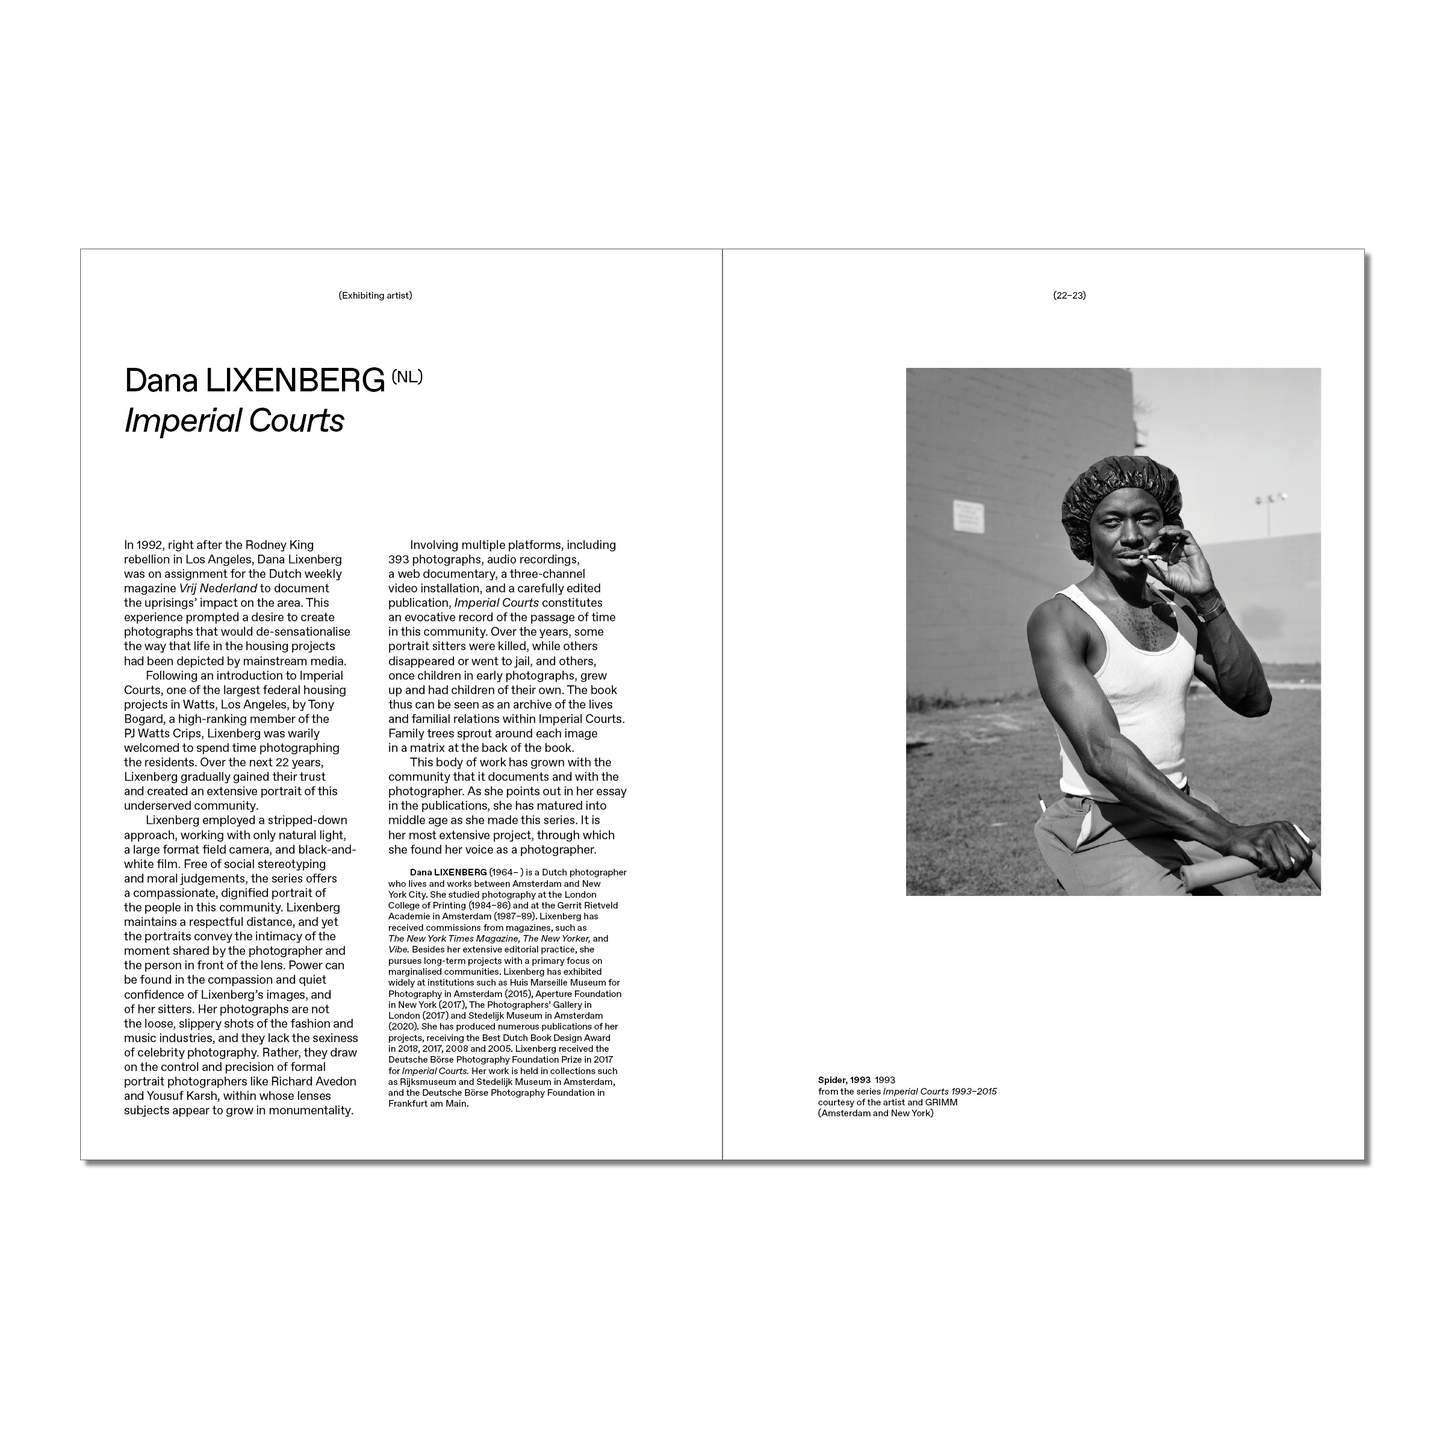 Not standing still: New approaches in documentary photography catalogue